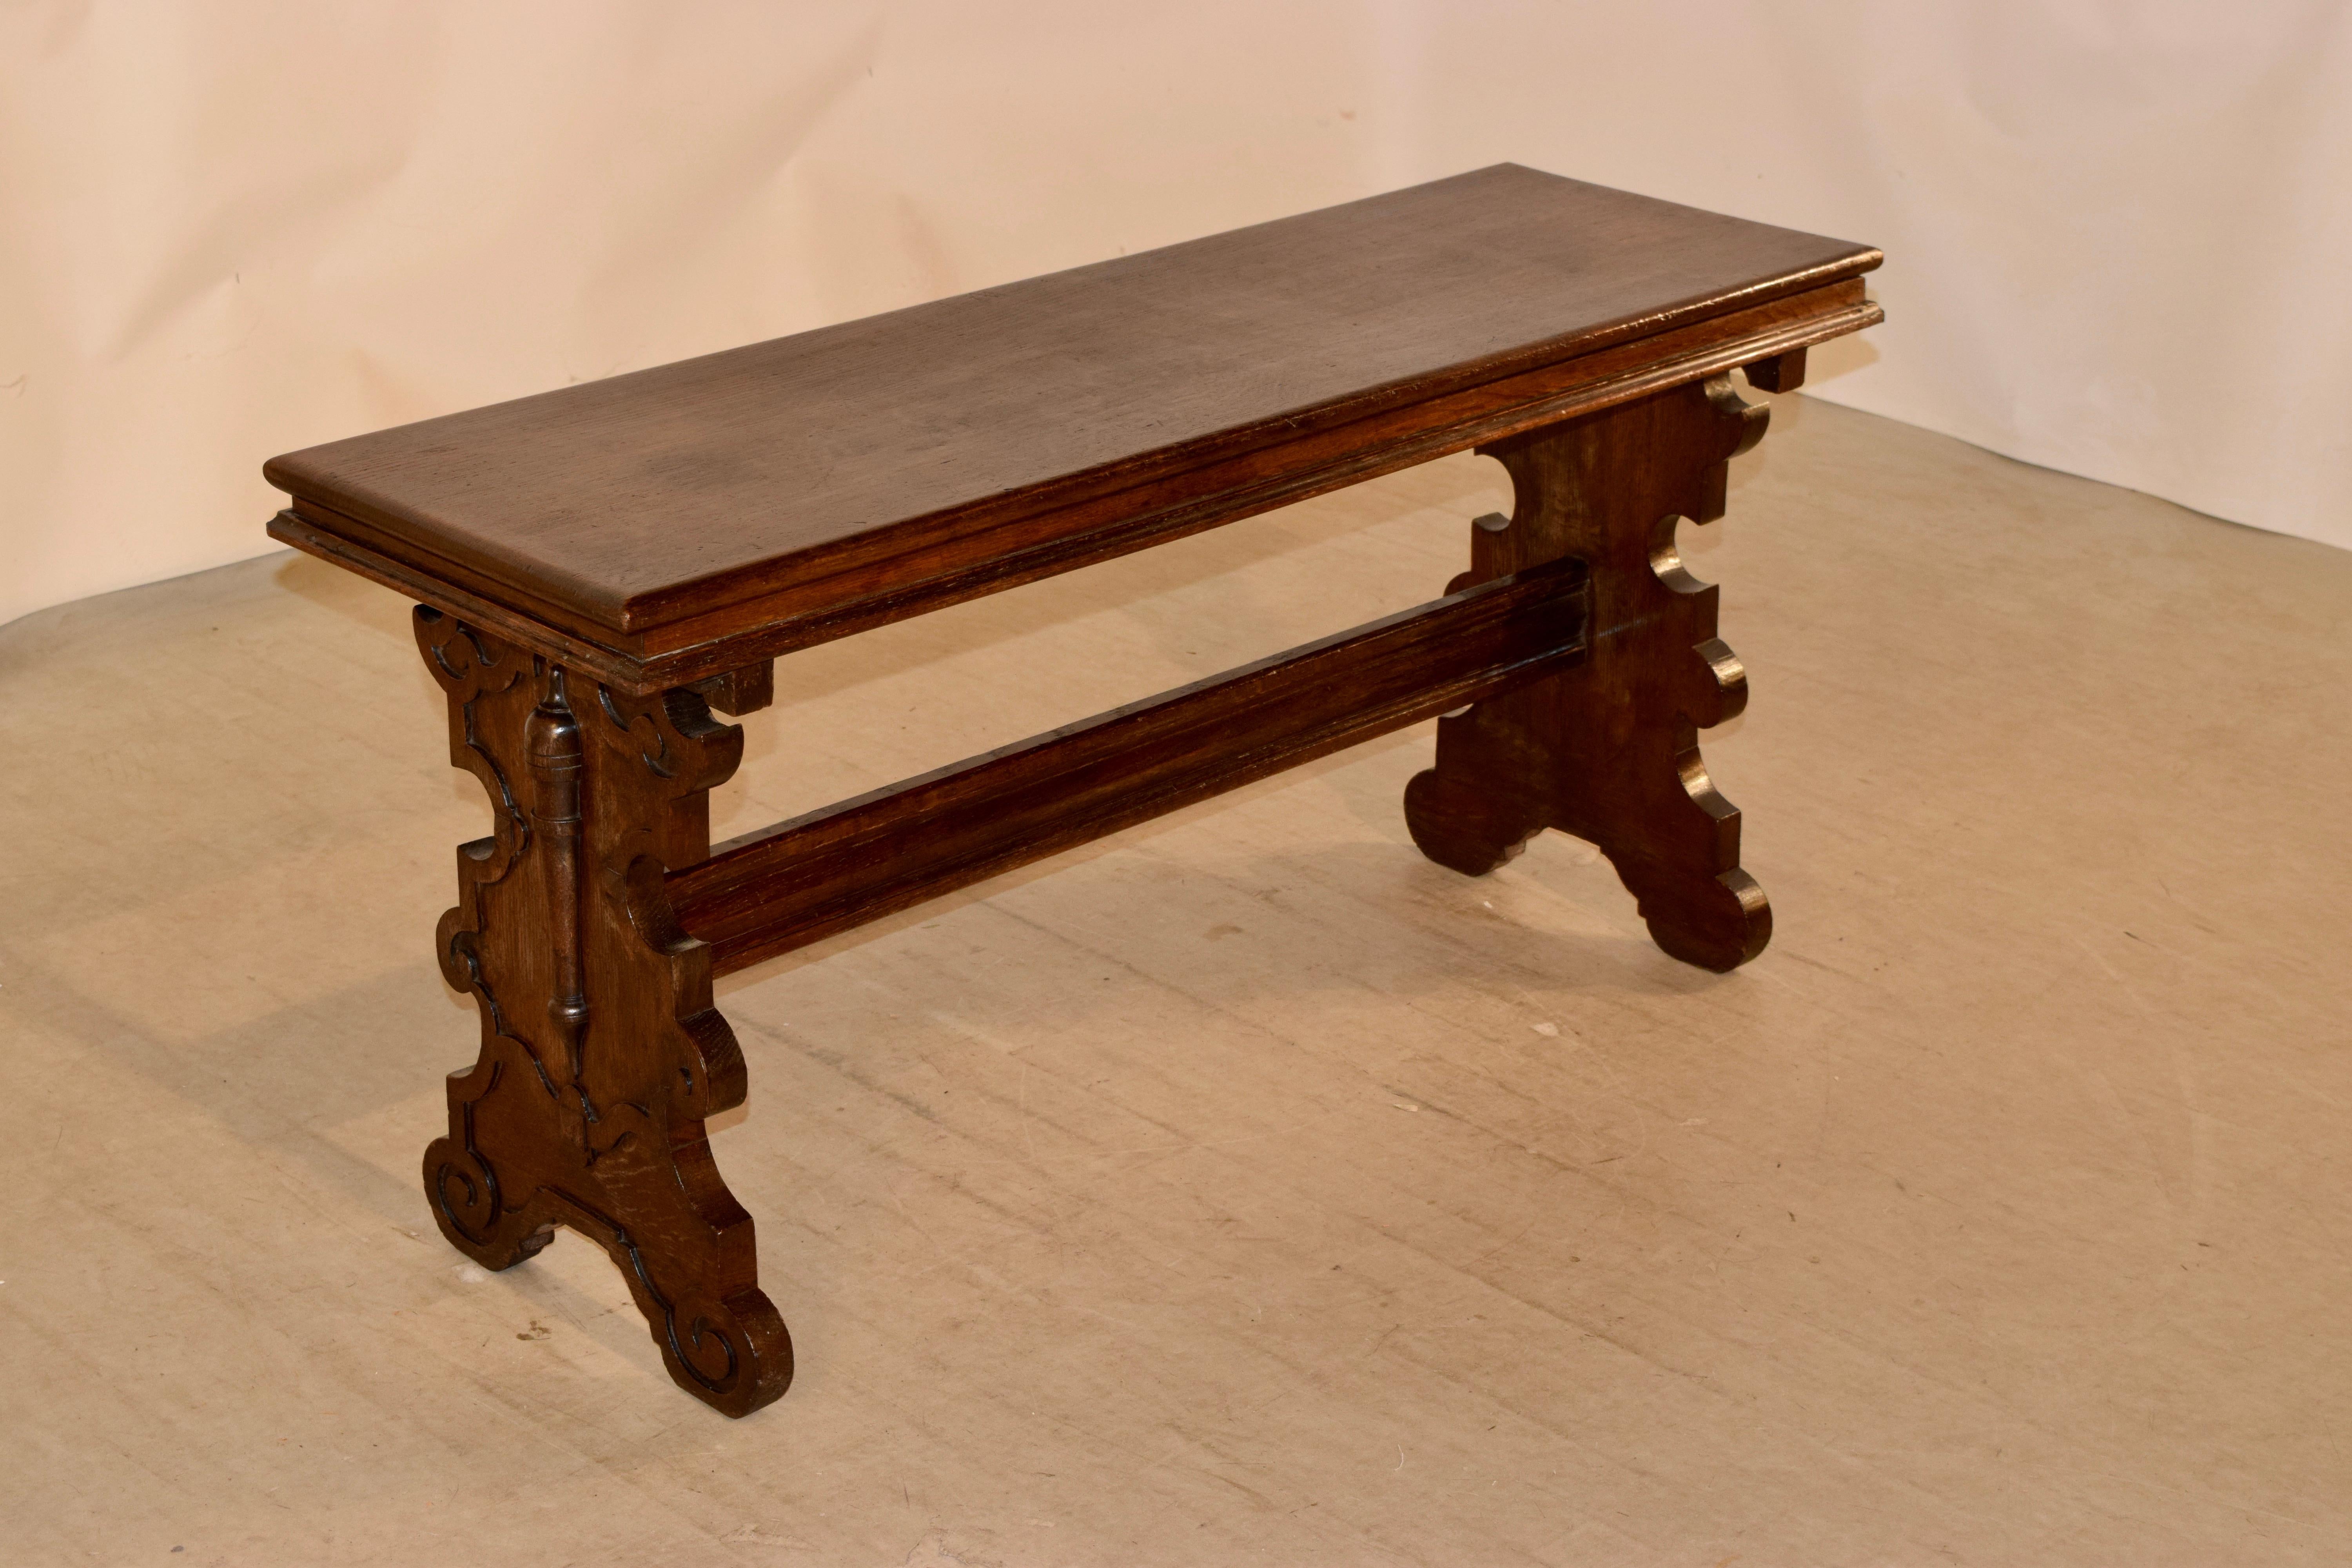 19th century oak bench from England in the Renaissance style. The seat is a single plank with a molded edge surround, following down to trestle legs with lovely scalloped and carved designs joined by a nice stretcher.